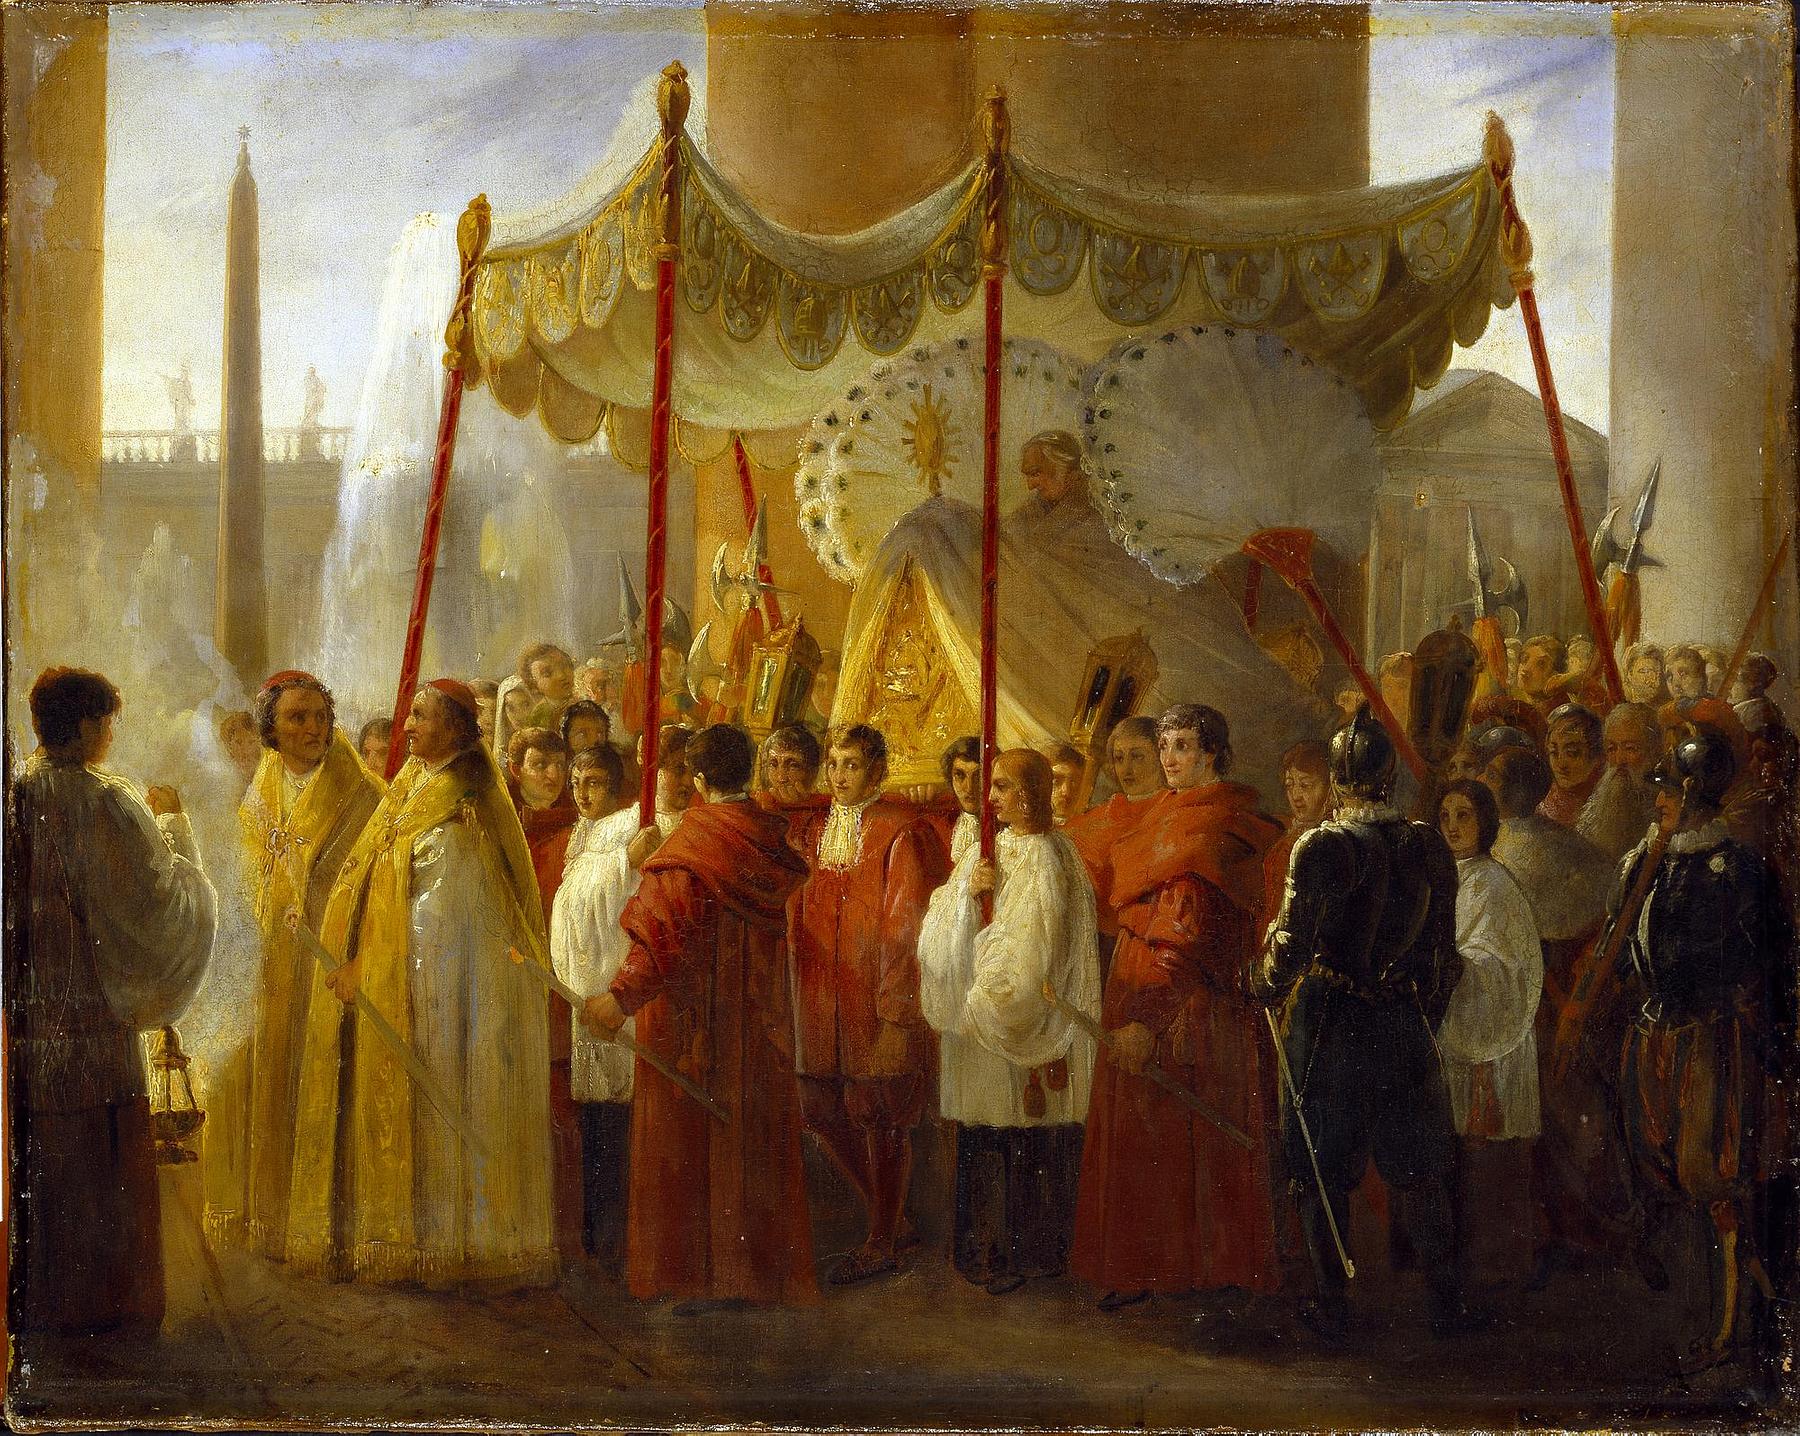 Pope Pius VIII Is Carried through the Colonnade of St. Peter's Basilica in a Corpus Christi Procession, B79